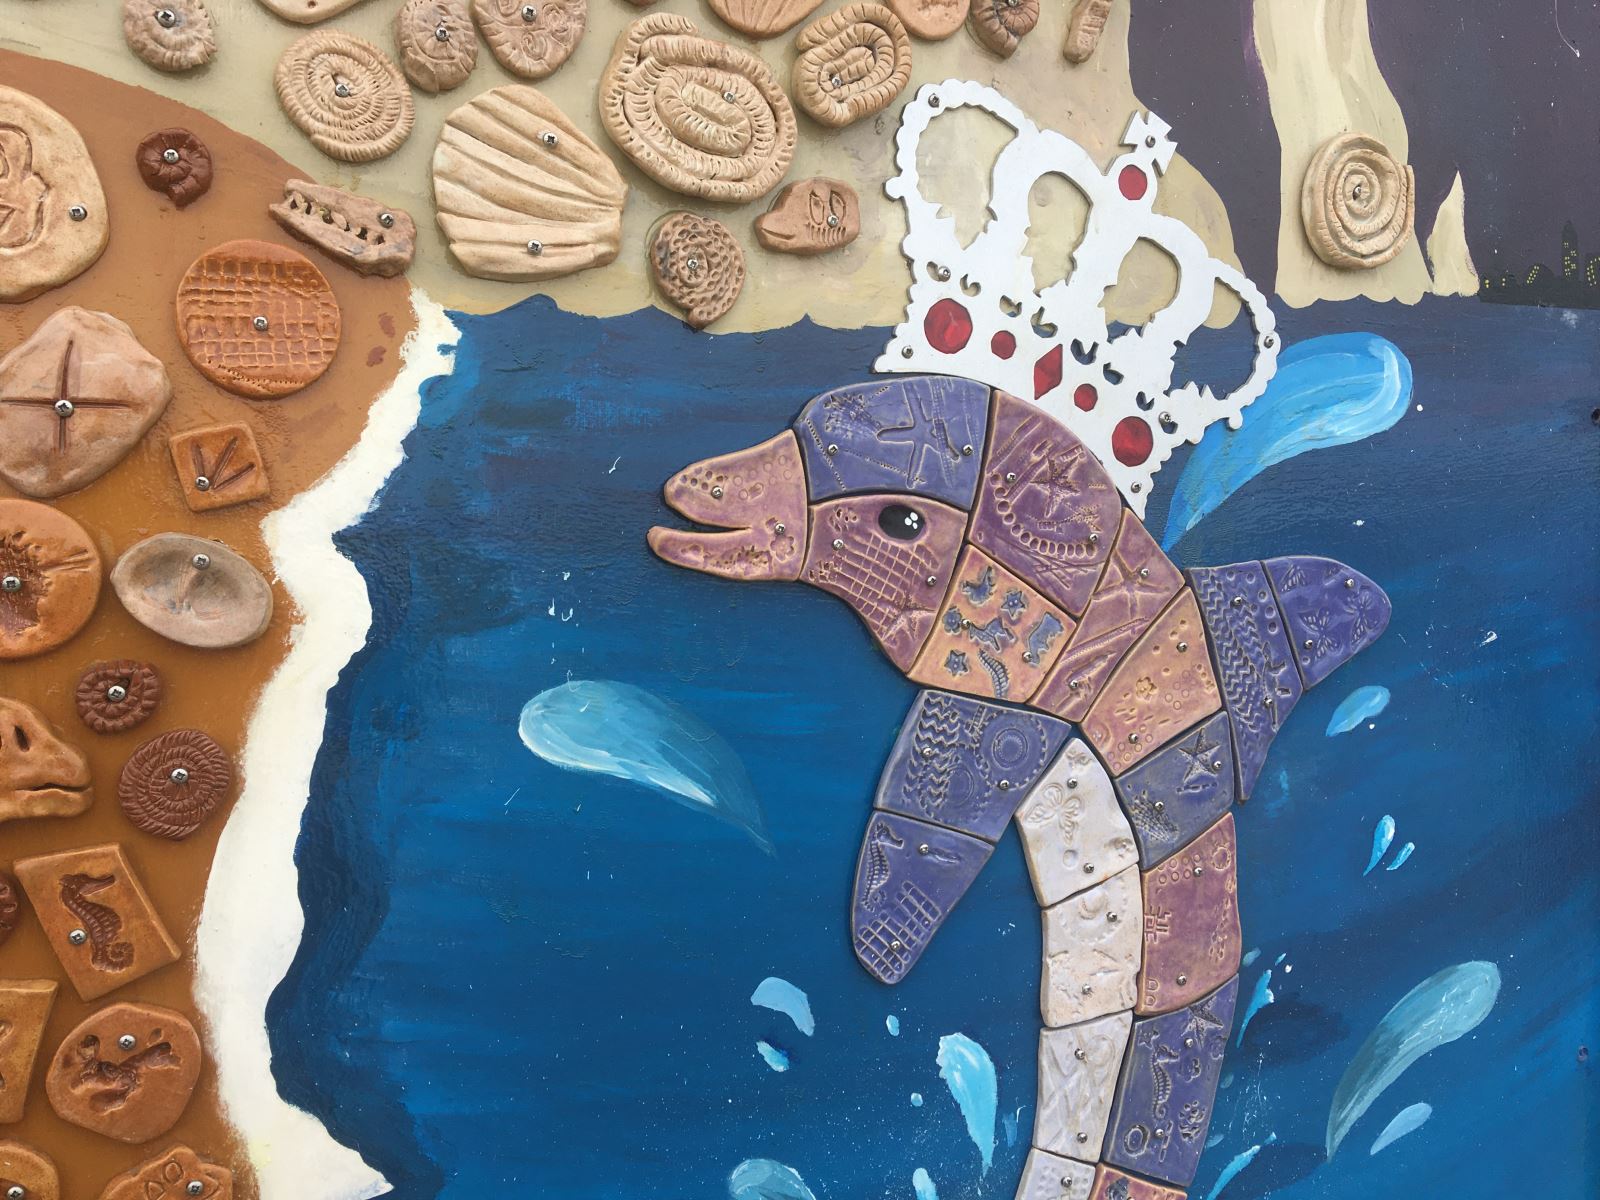 Swanage Jubilee Mural closeup of fossils and dolphin made from ceramic tiles